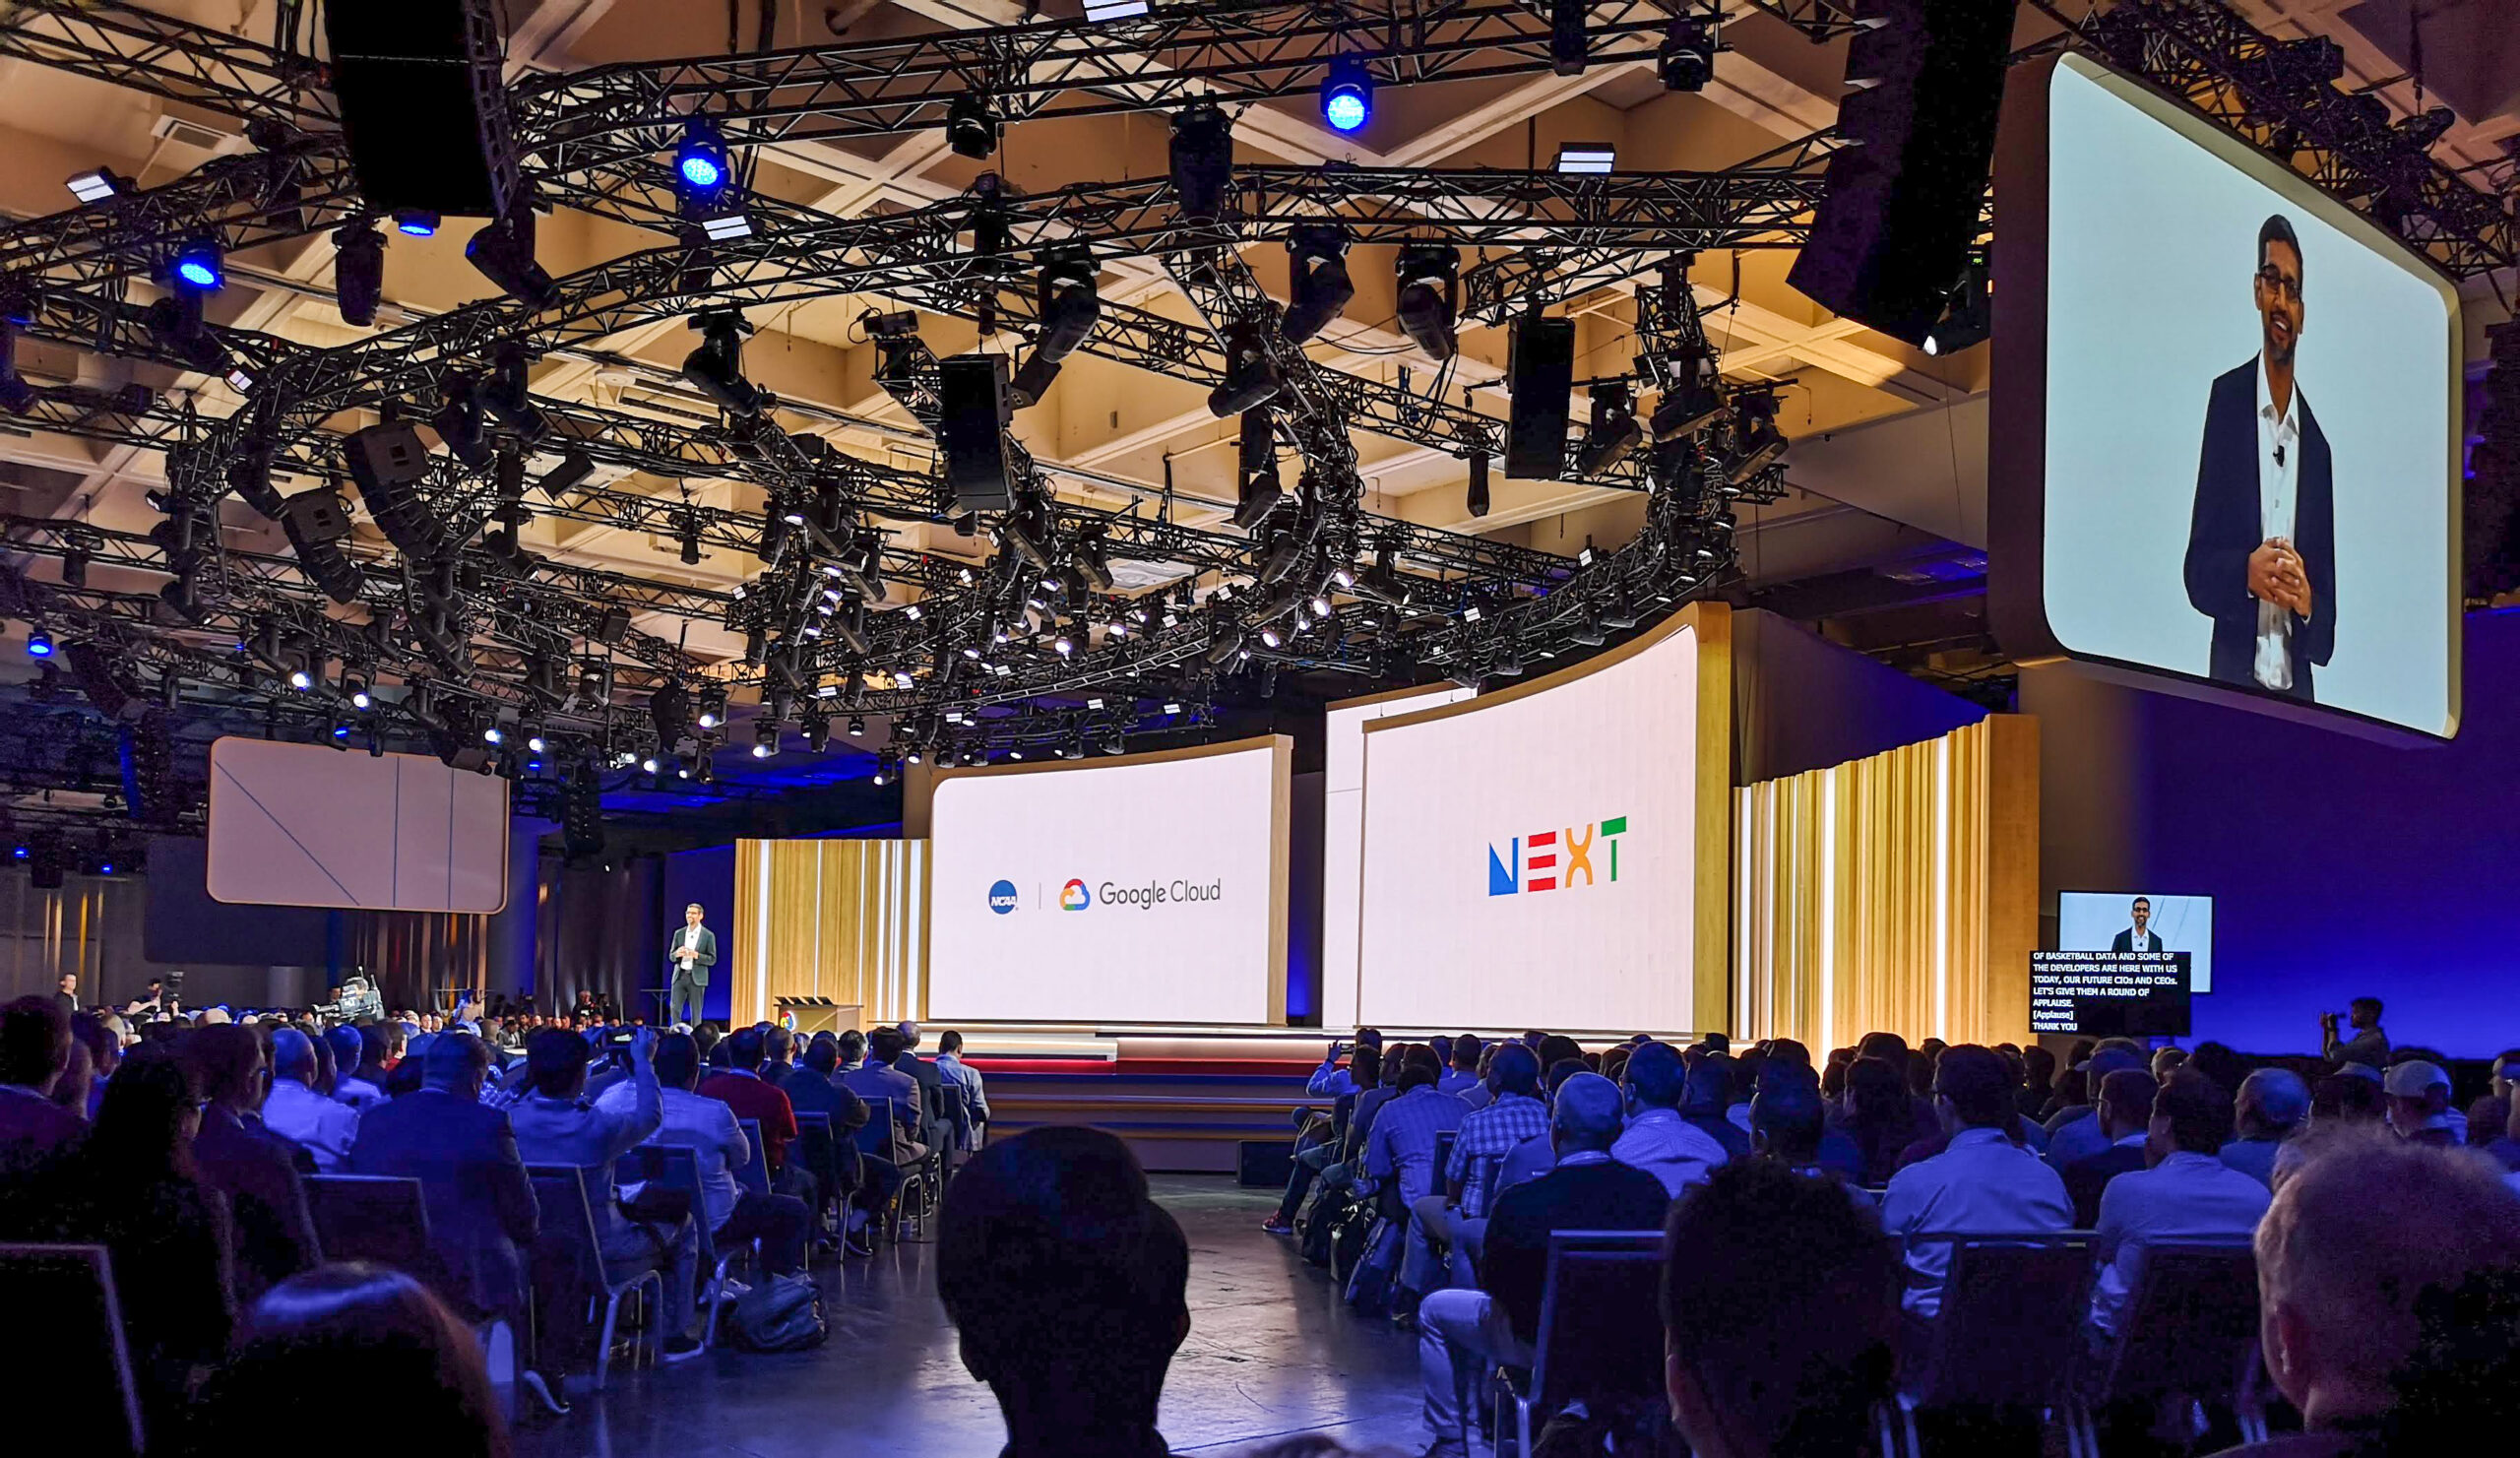 Next '19 announcements: new in Google Cloud